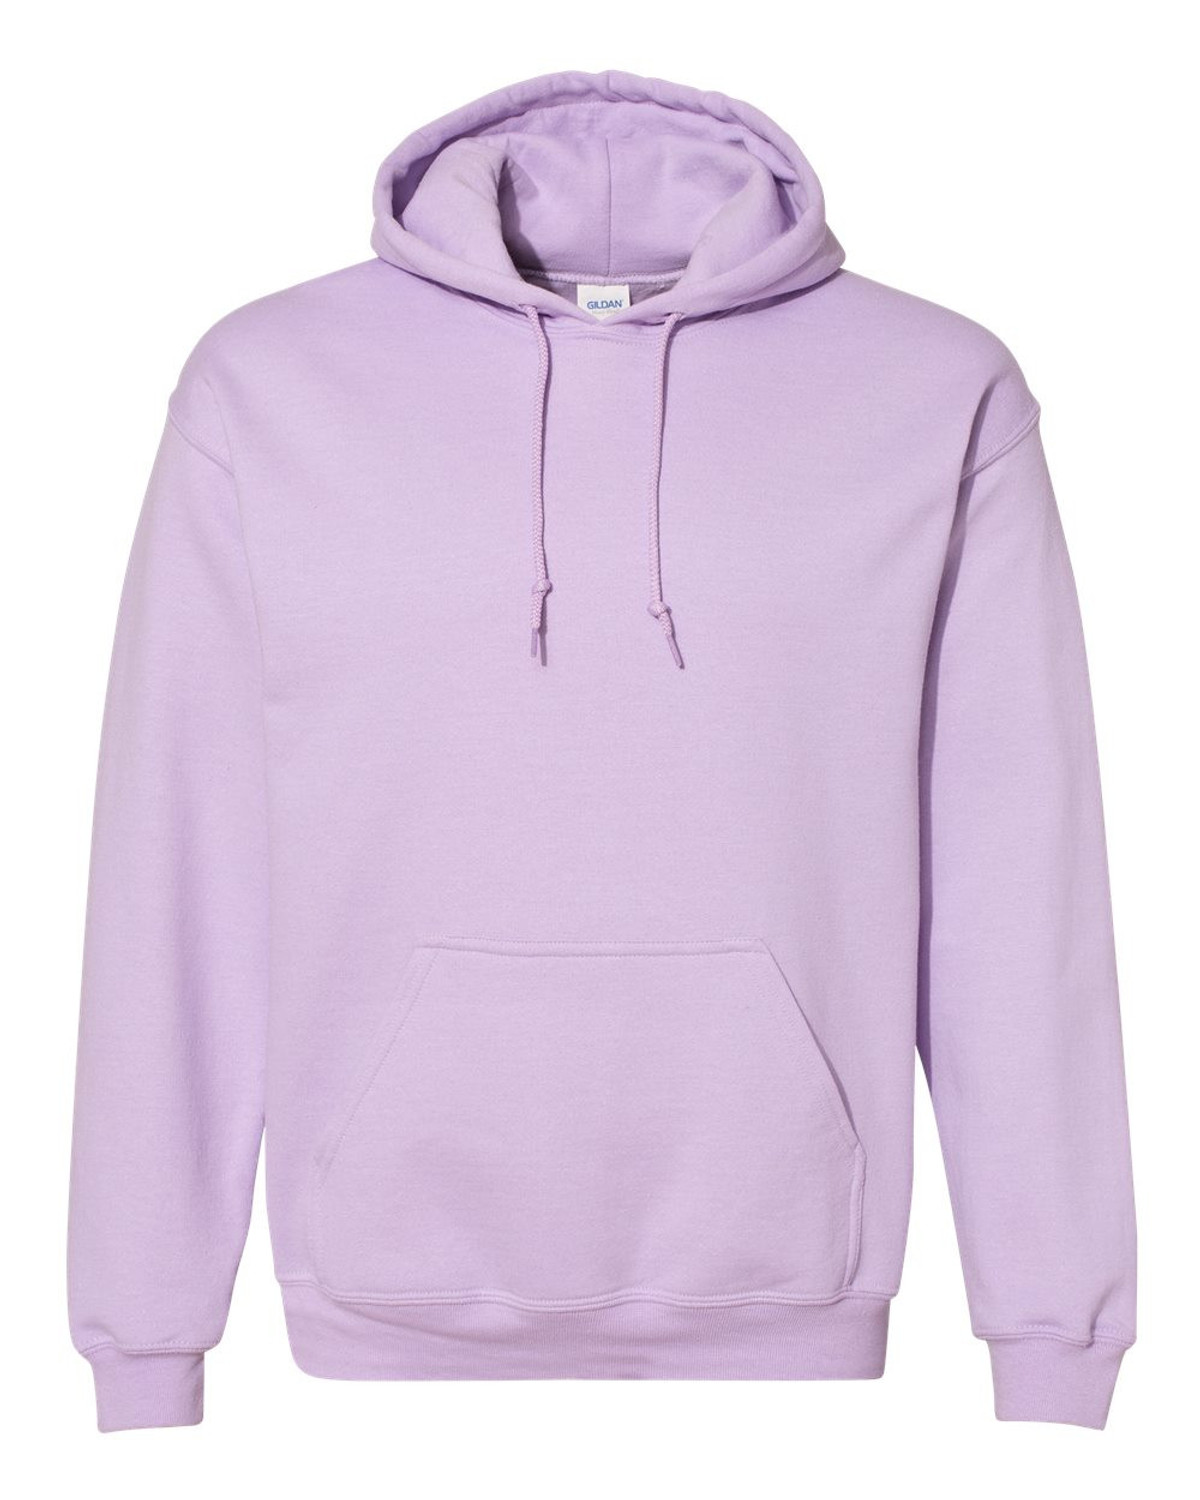 Heavy Blend 8 oz. 50/50 Hood (G185) Safety Pink, 2XL at  Men's  Clothing store